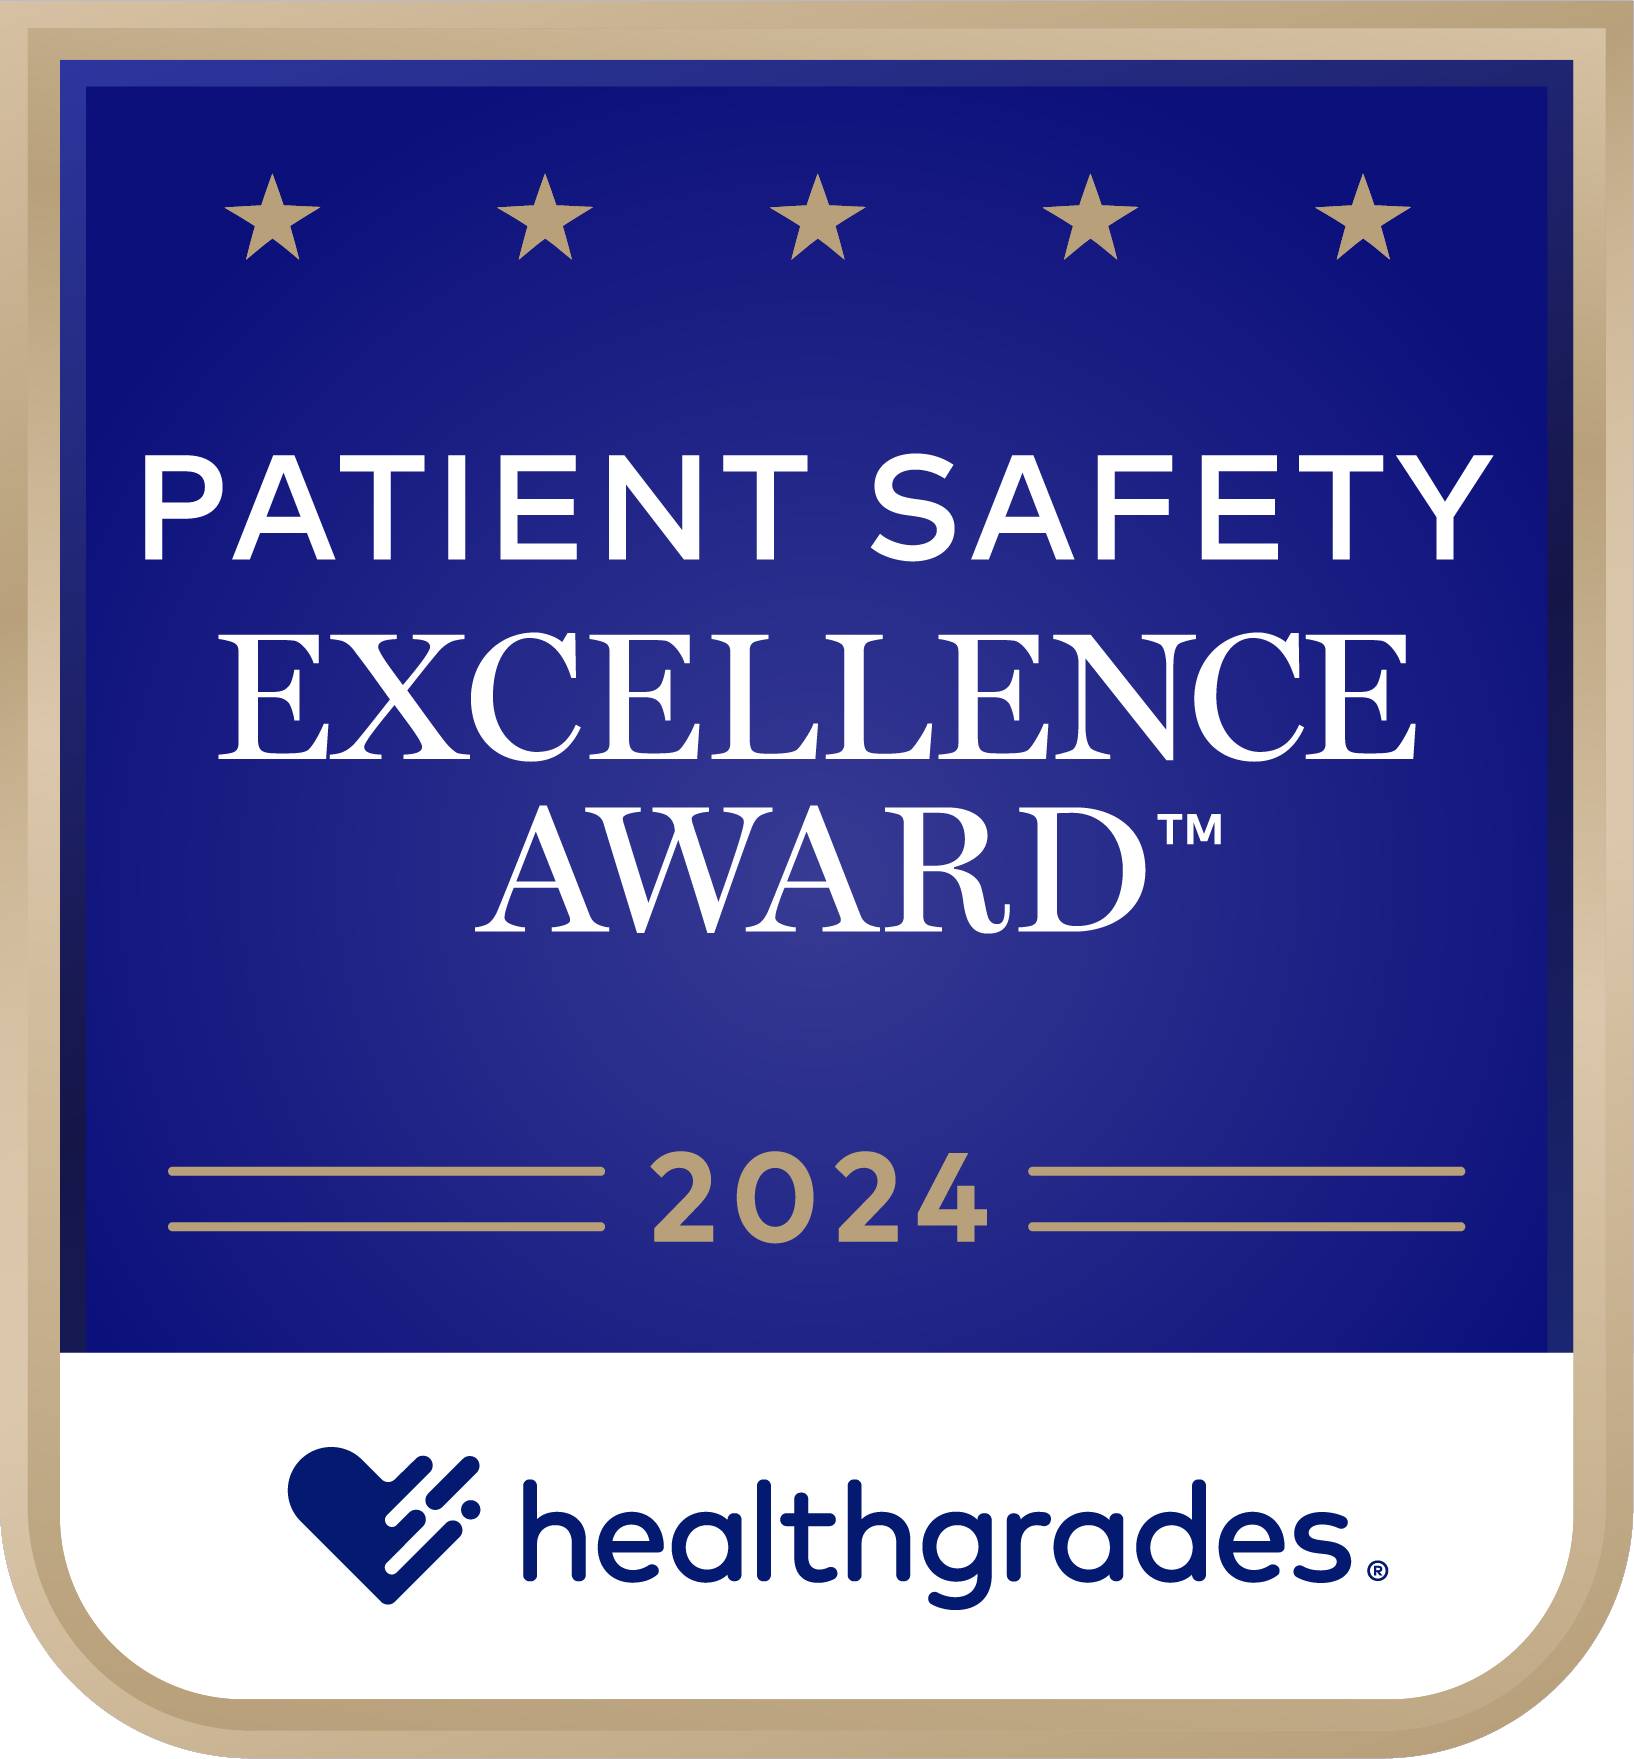 2023 5% Patient Safety Award Image